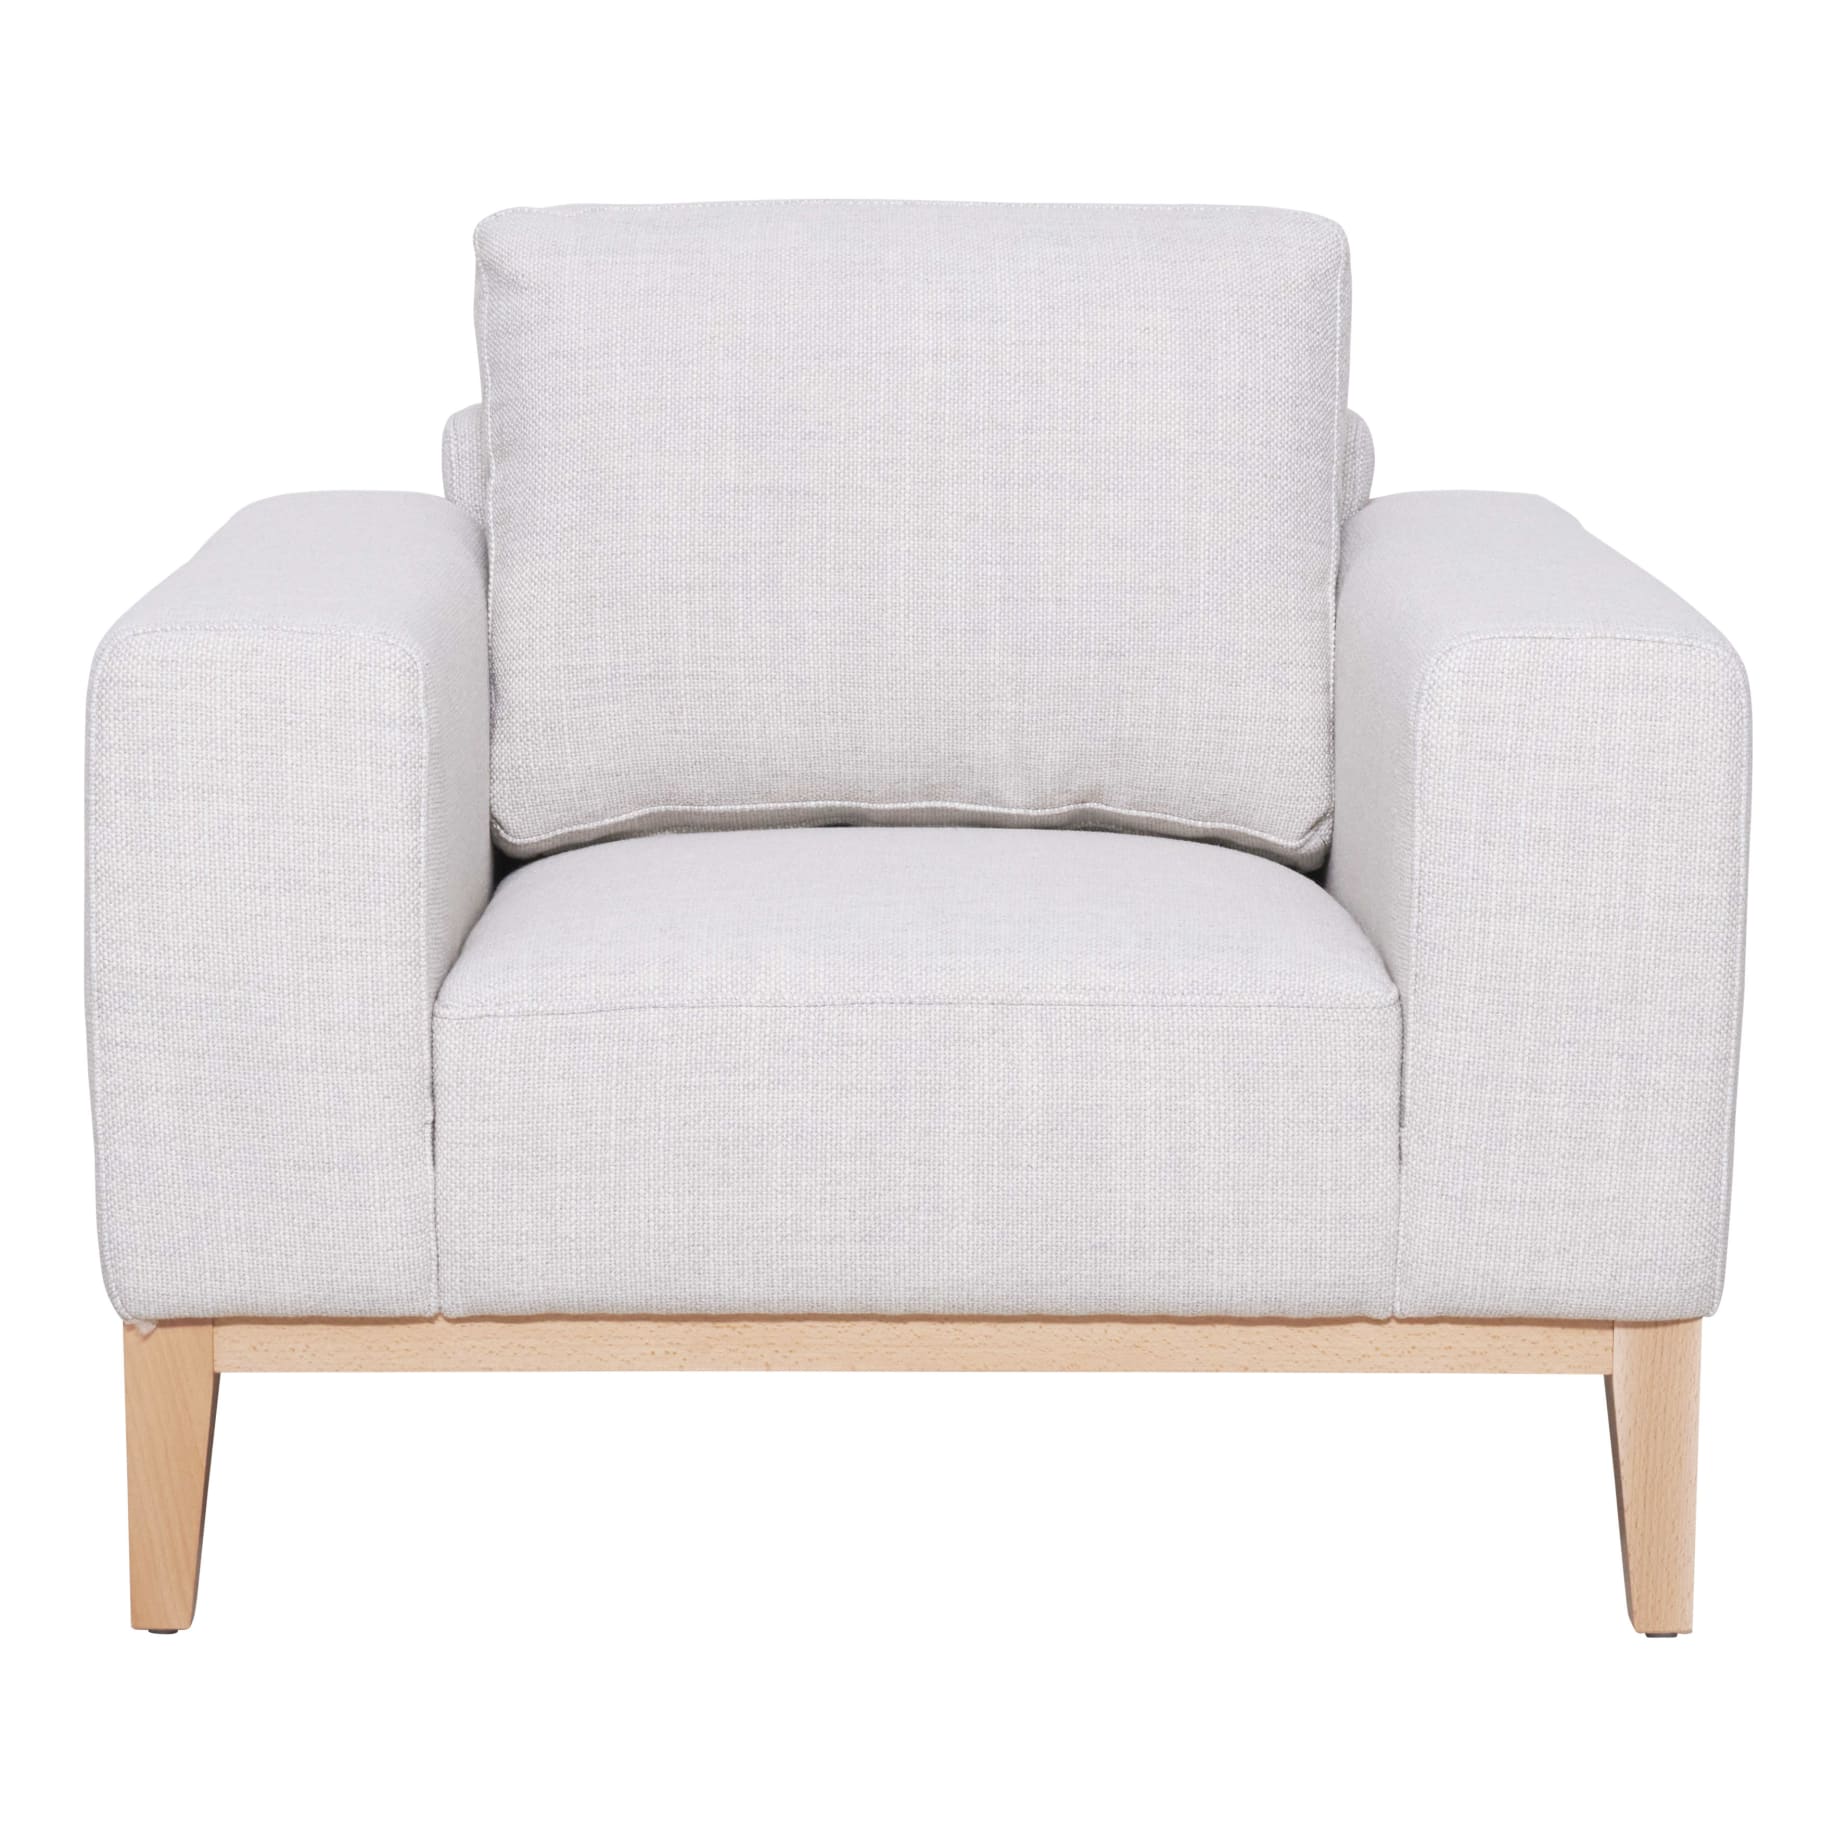 Moana Armchair in Kind White